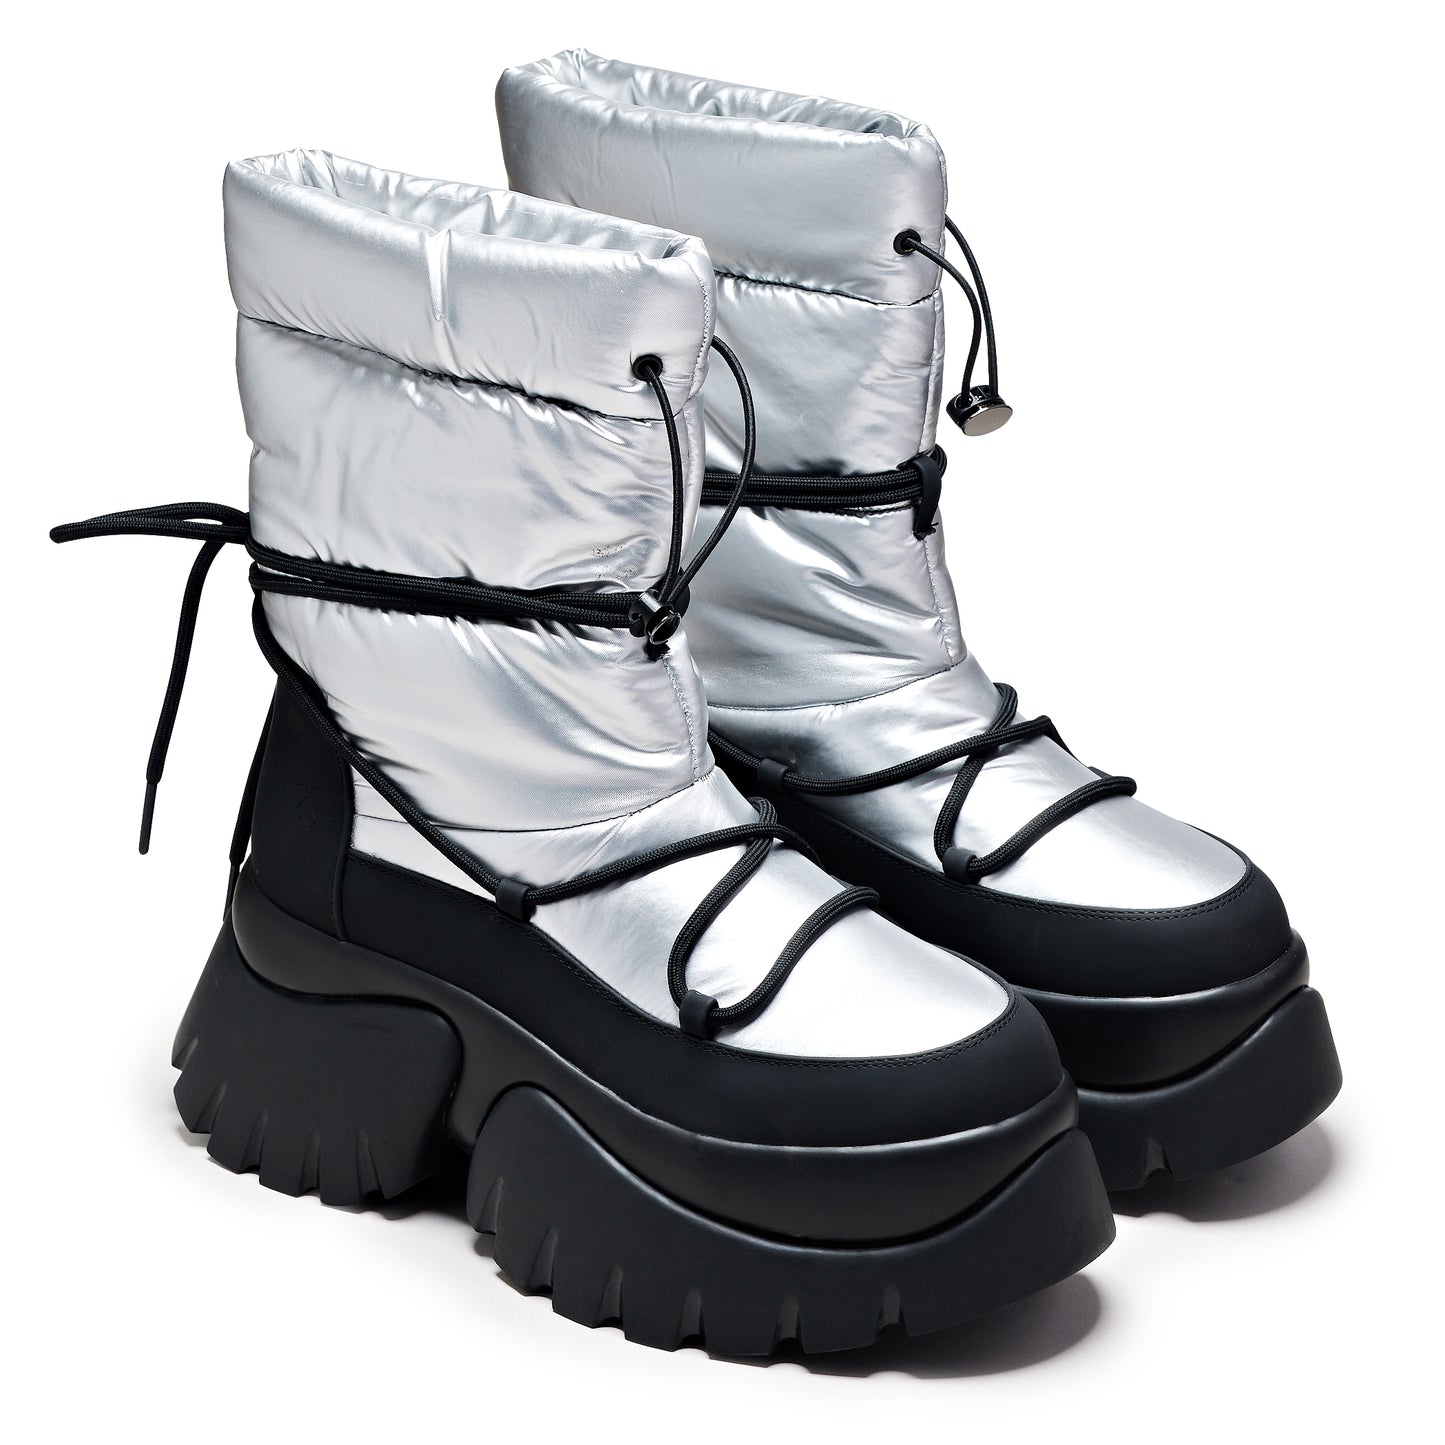 A Glass Mirage Snow Boots - Steel - Ankle Boots - KOI Footwear - Silver - Three-Quarter View